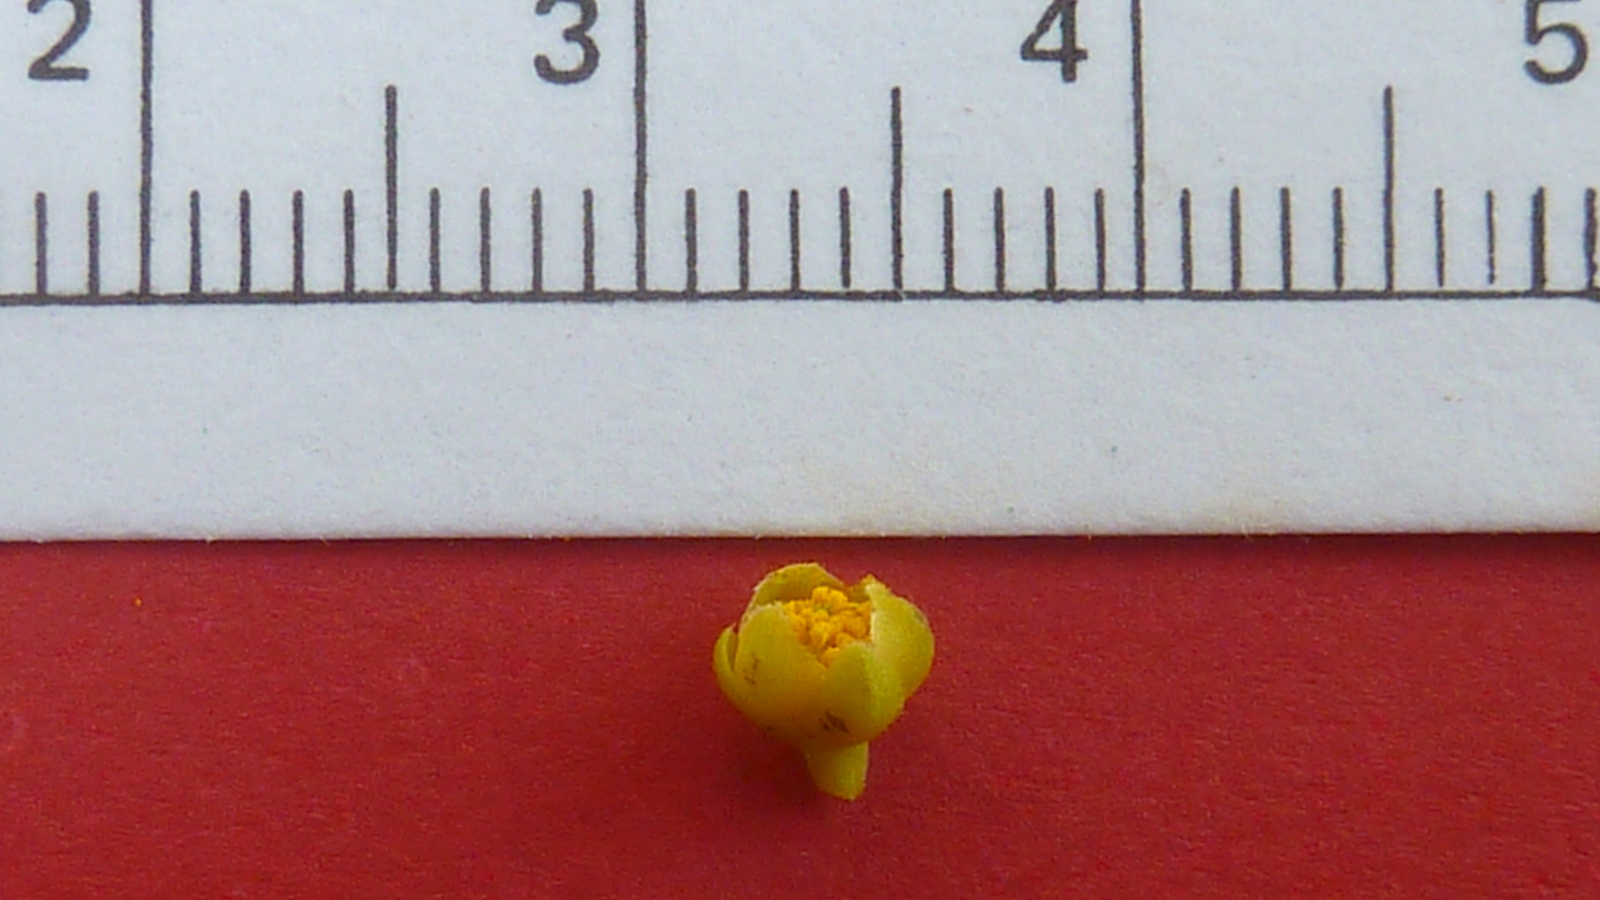 a small yellow flower with a ruler behind it